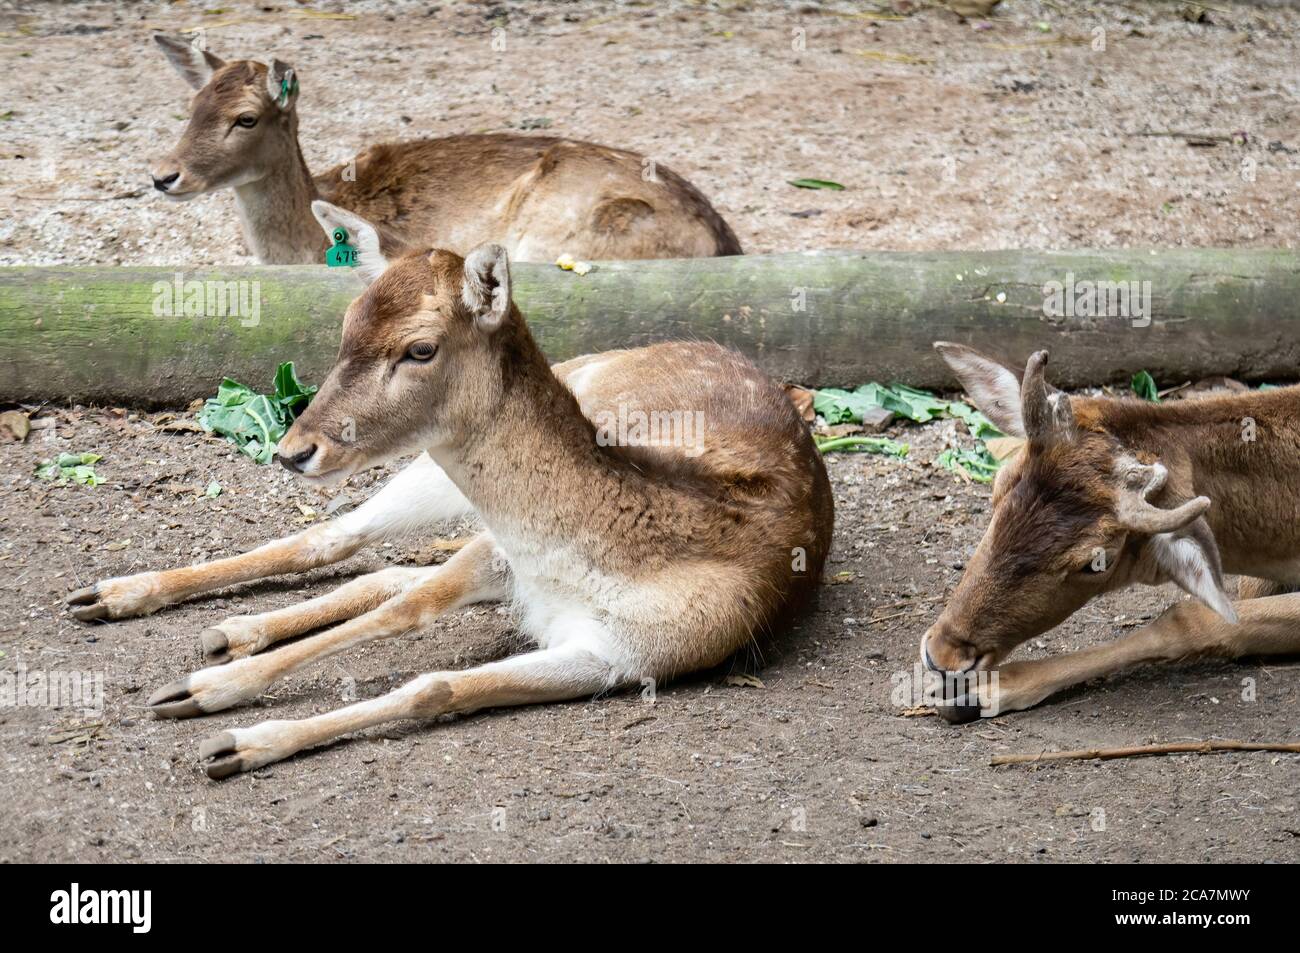 A group of Fallow deer (Dama dama - a ruminant mammal belonging to the family Cervidae) laid down on the ground inside Zoo Safari zoological park. Stock Photo